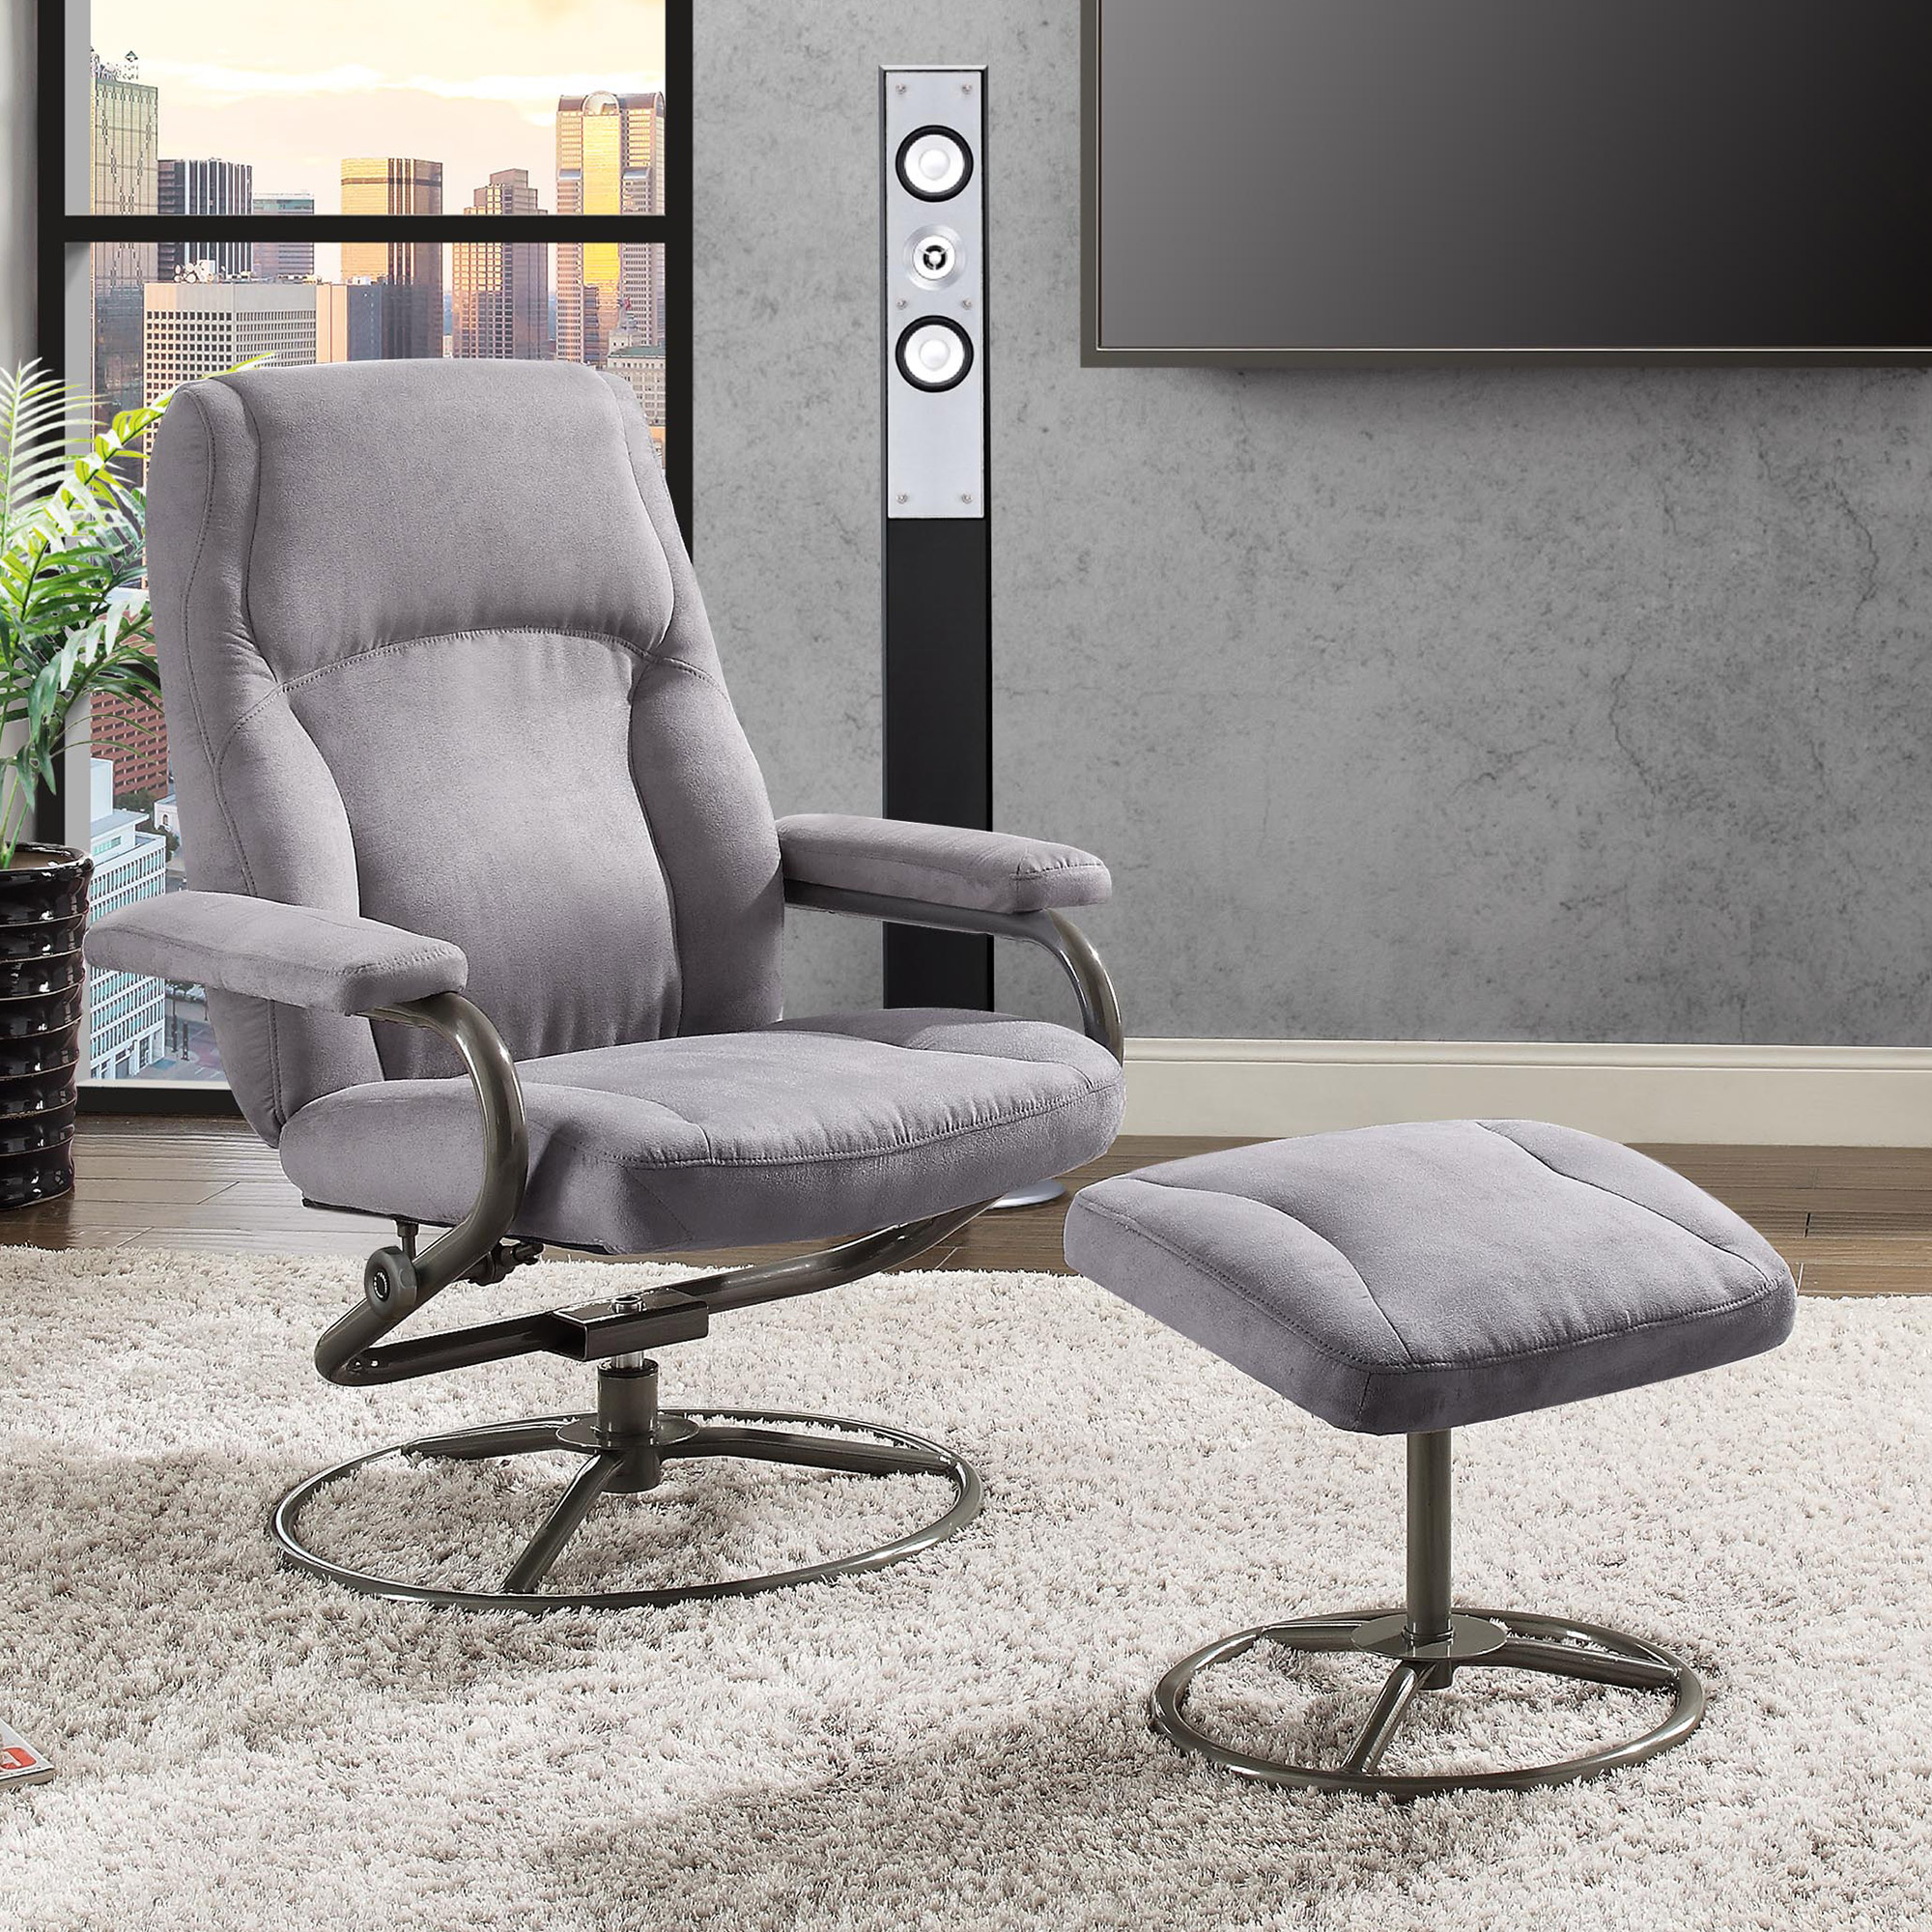 Mainstays Plush Pillowed Recliner Swivel Chair and Ottoman Set, in Gray - image 1 of 4